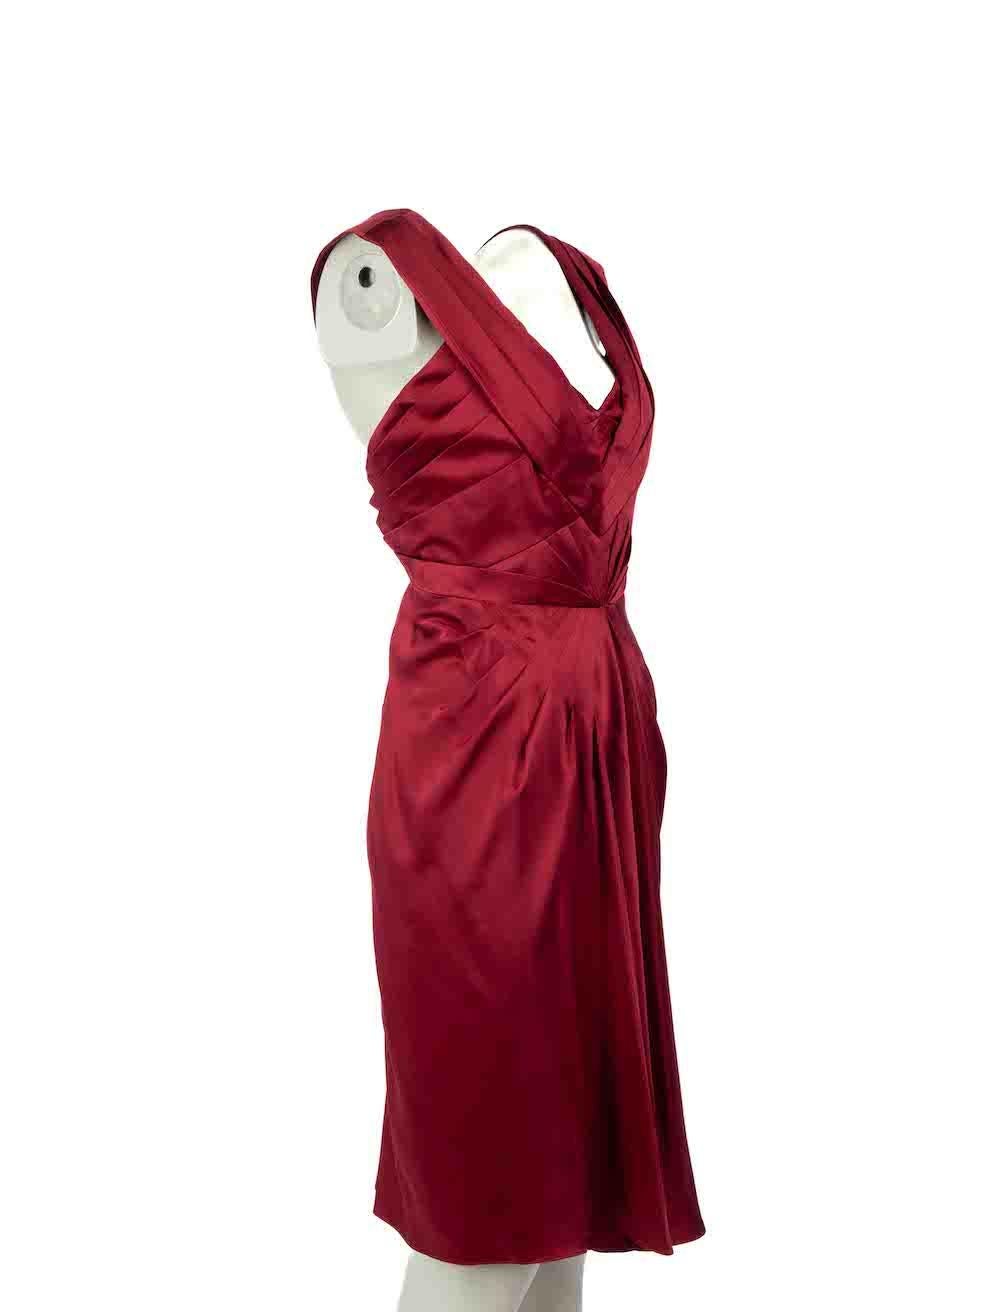 CONDITION is Very good. Hardly any visible wear to dress is evident on this used Zac Posen designer resale item.

Details
Burgundy
Silk
Dress
Pleated details
Figure hugging fit
Knee length
Sleeveless
V-neck
Back zip fastening

Made in USA